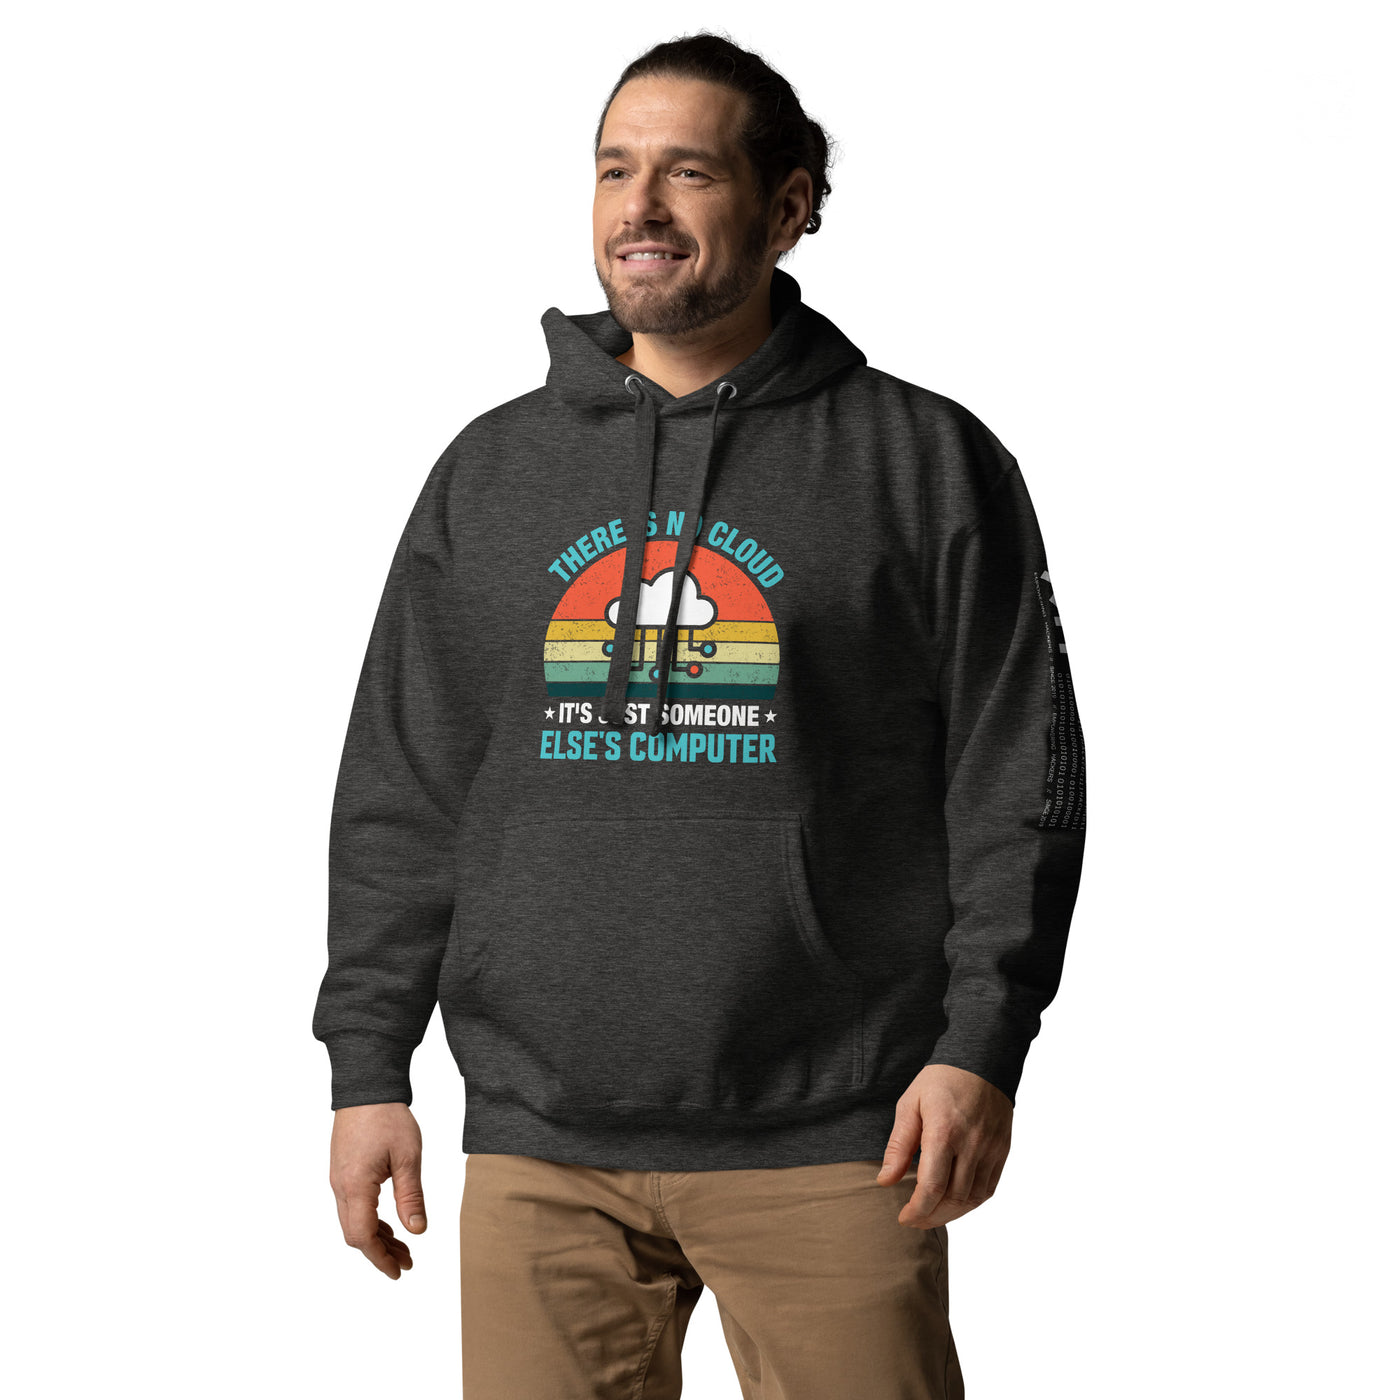 There is no Cloud, it is someone else's computer - Unisex Hoodie